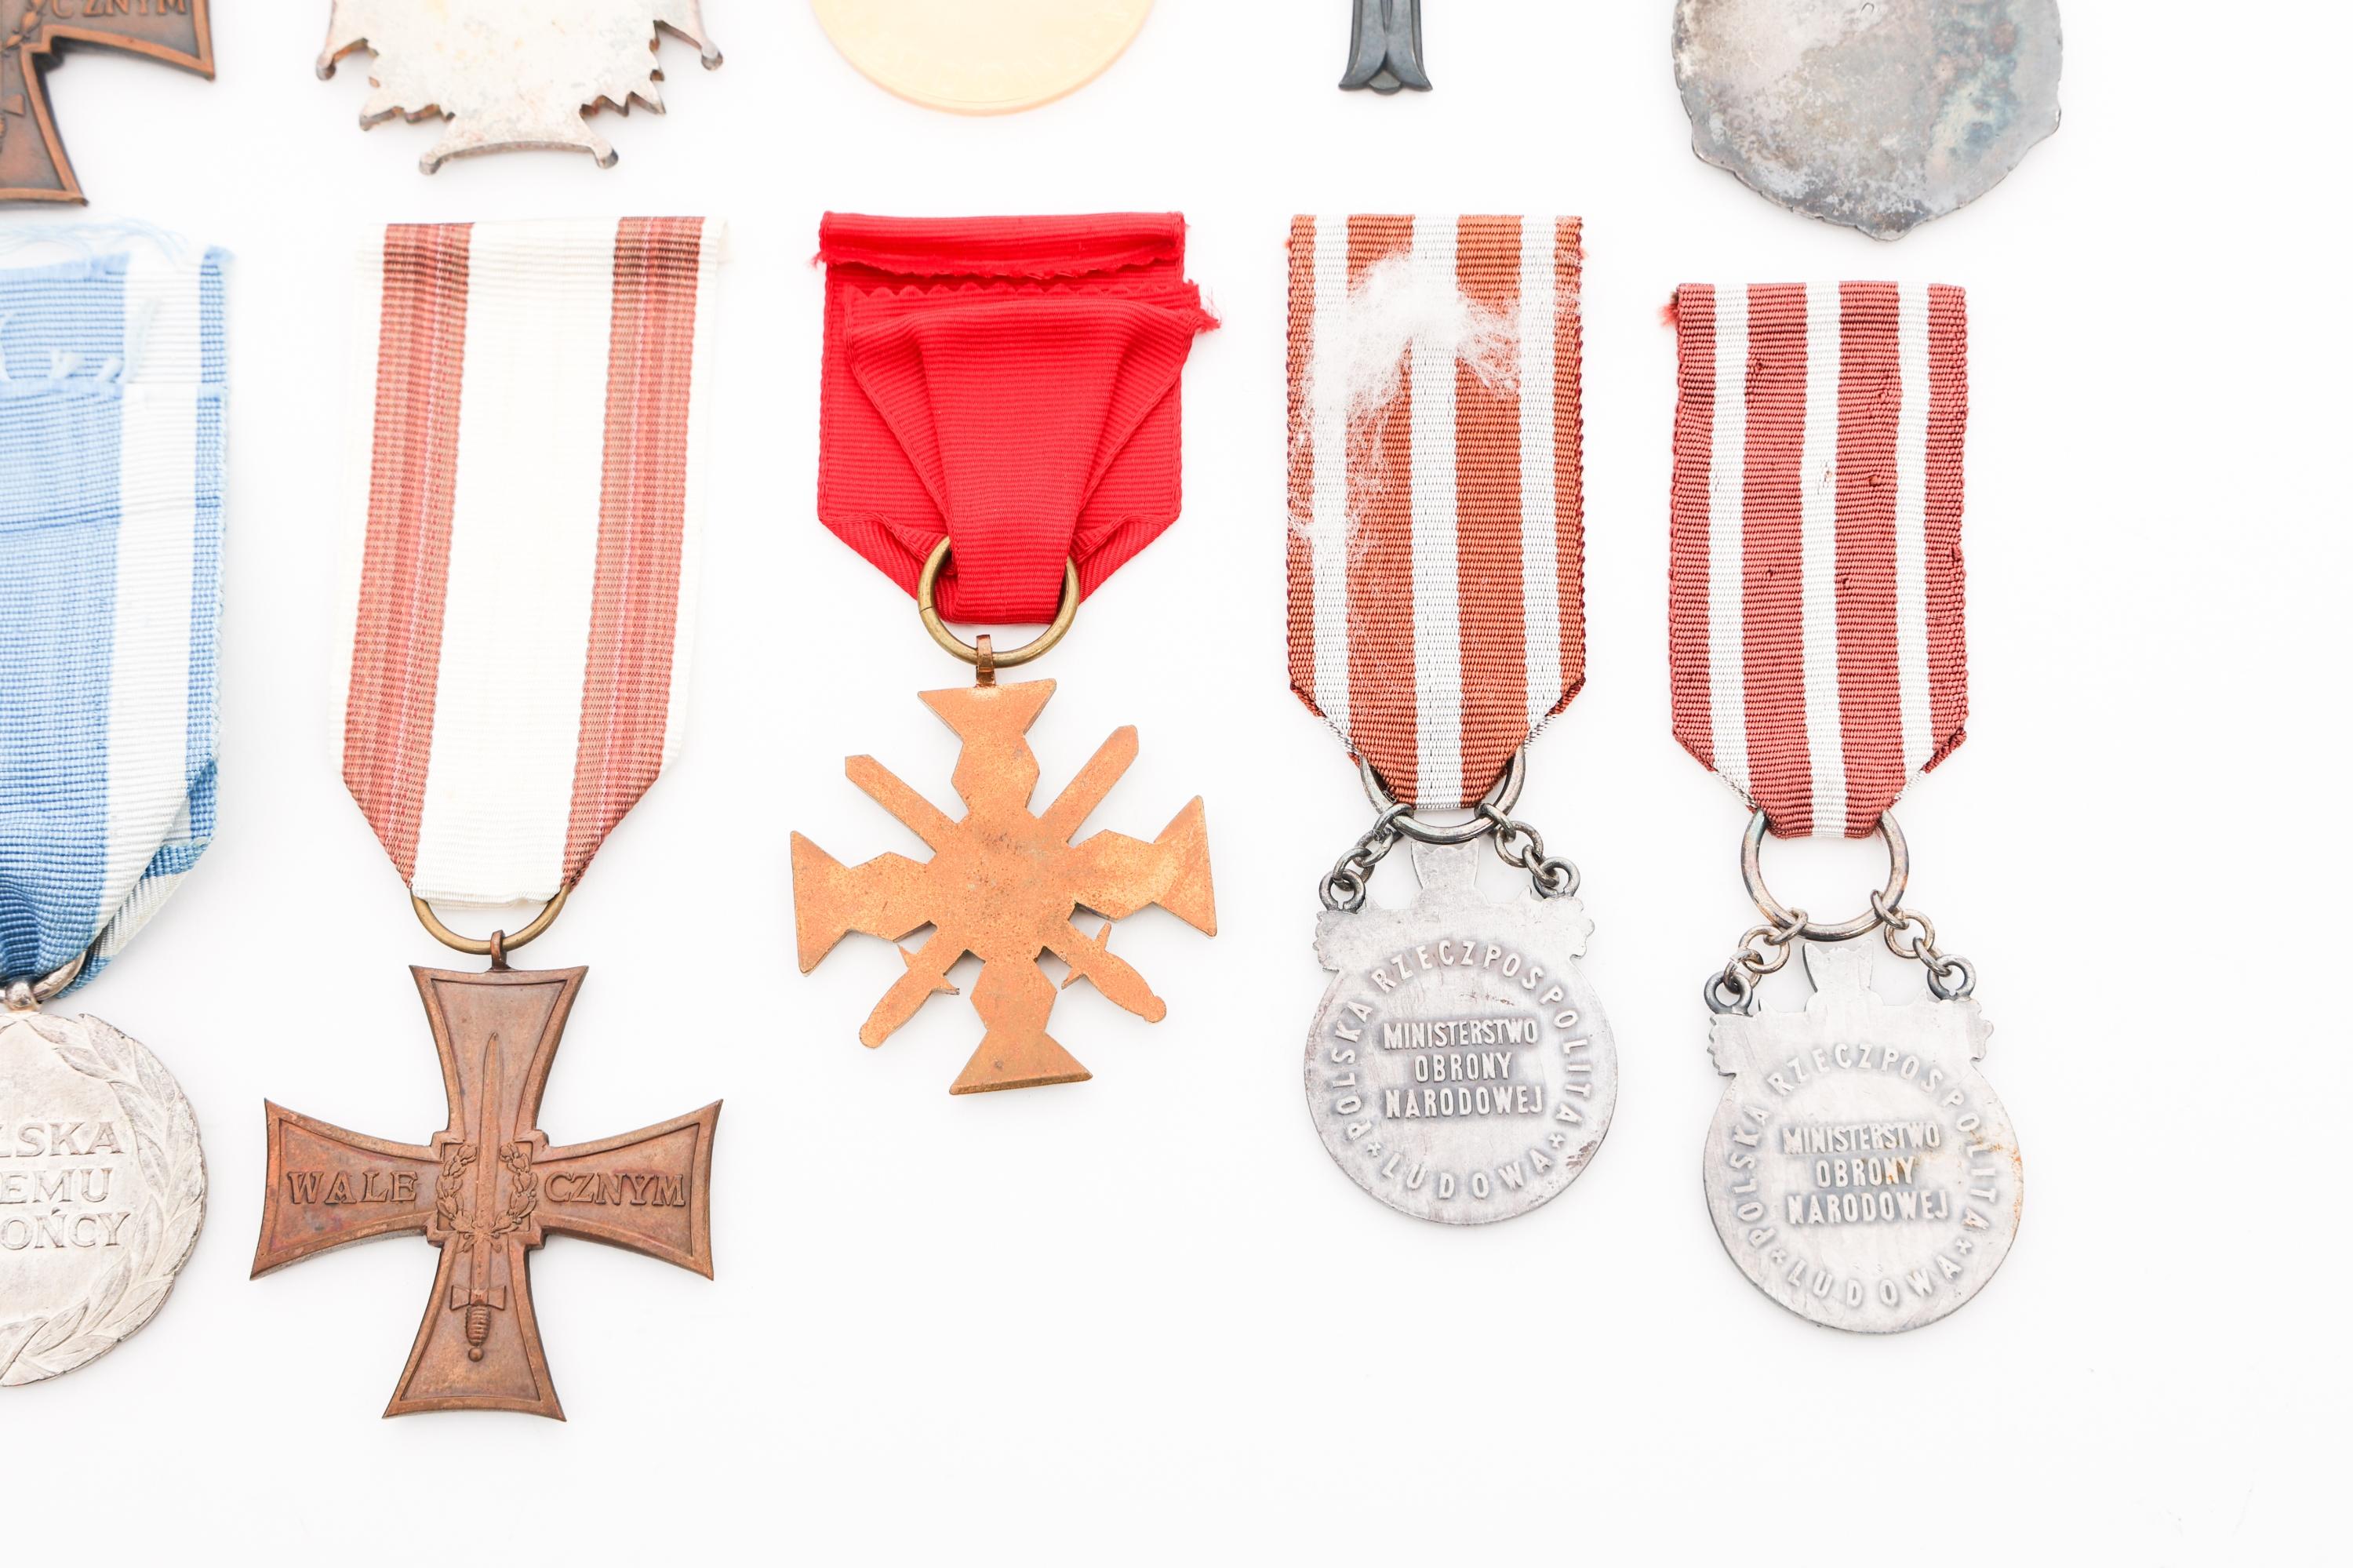 WWII POLISH SERVICE & ORDER MEDALS